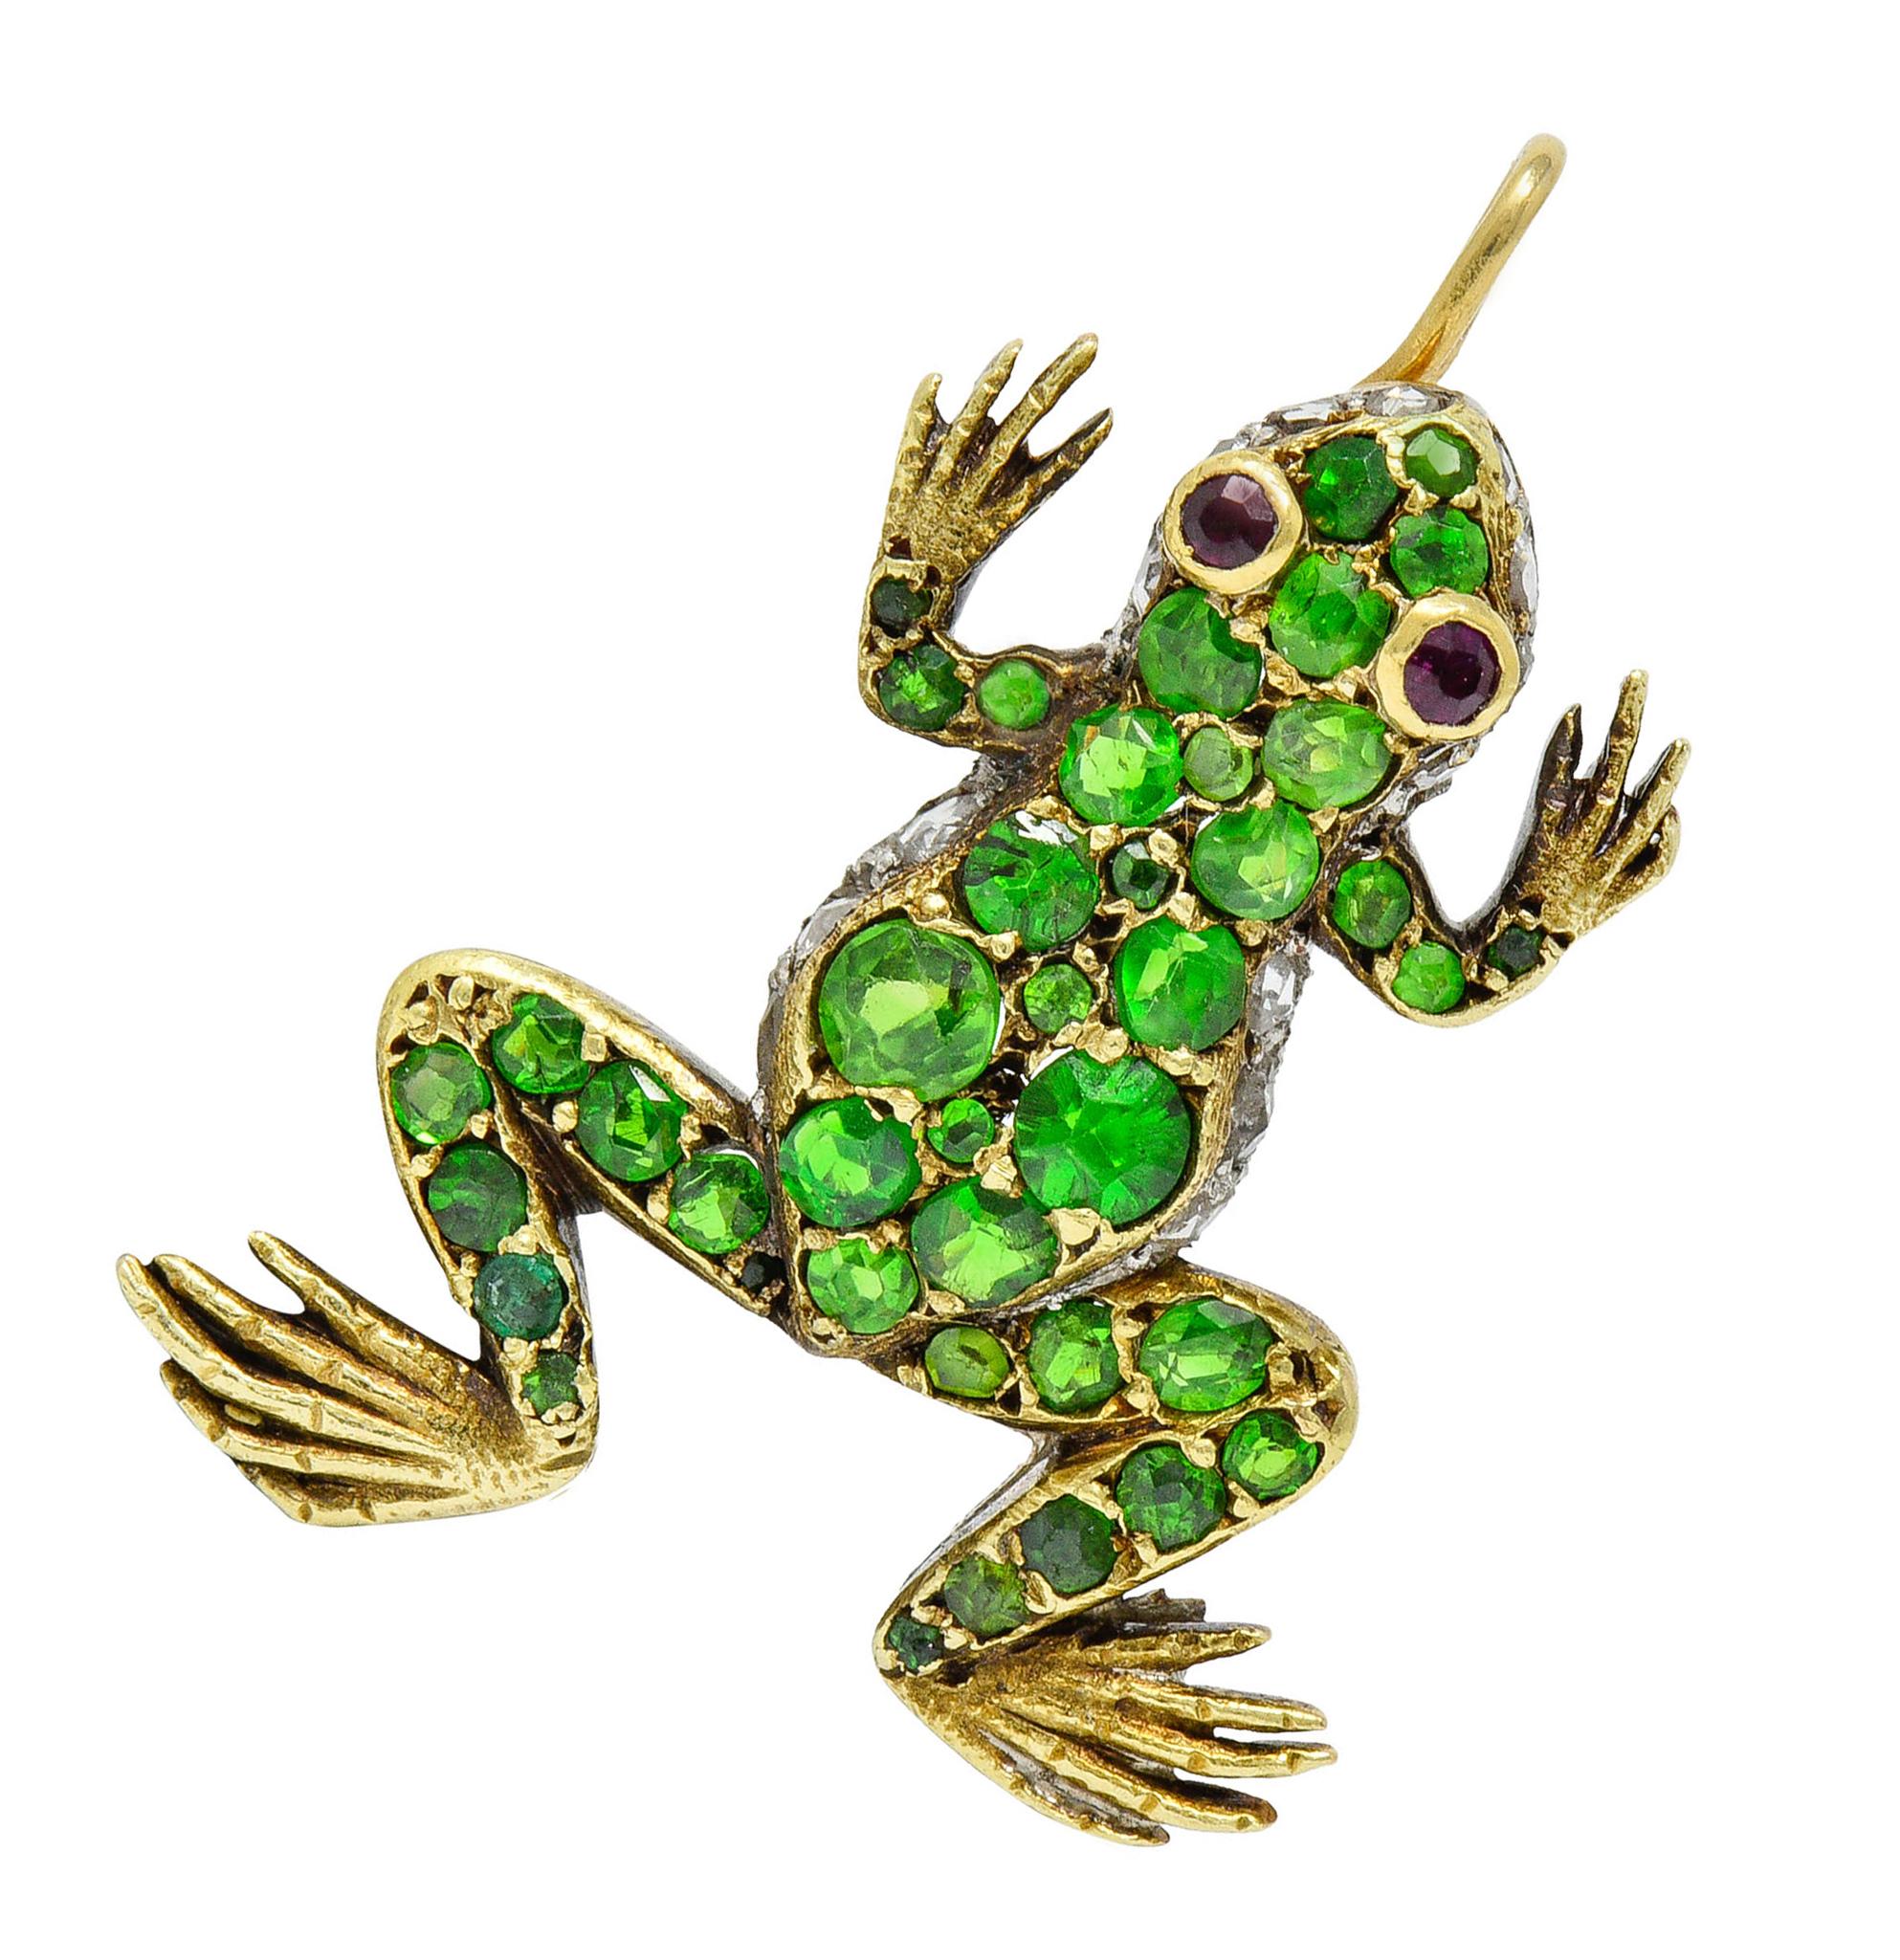 Designed as a frog with yellow gold back and limbs that contrasts platinum at its sides

Pavè set throughout by vibrant lime green demantoid garnets and near colorless rose cut diamonds

Accented by bright red round cut ruby eyes, bezel set

Tested